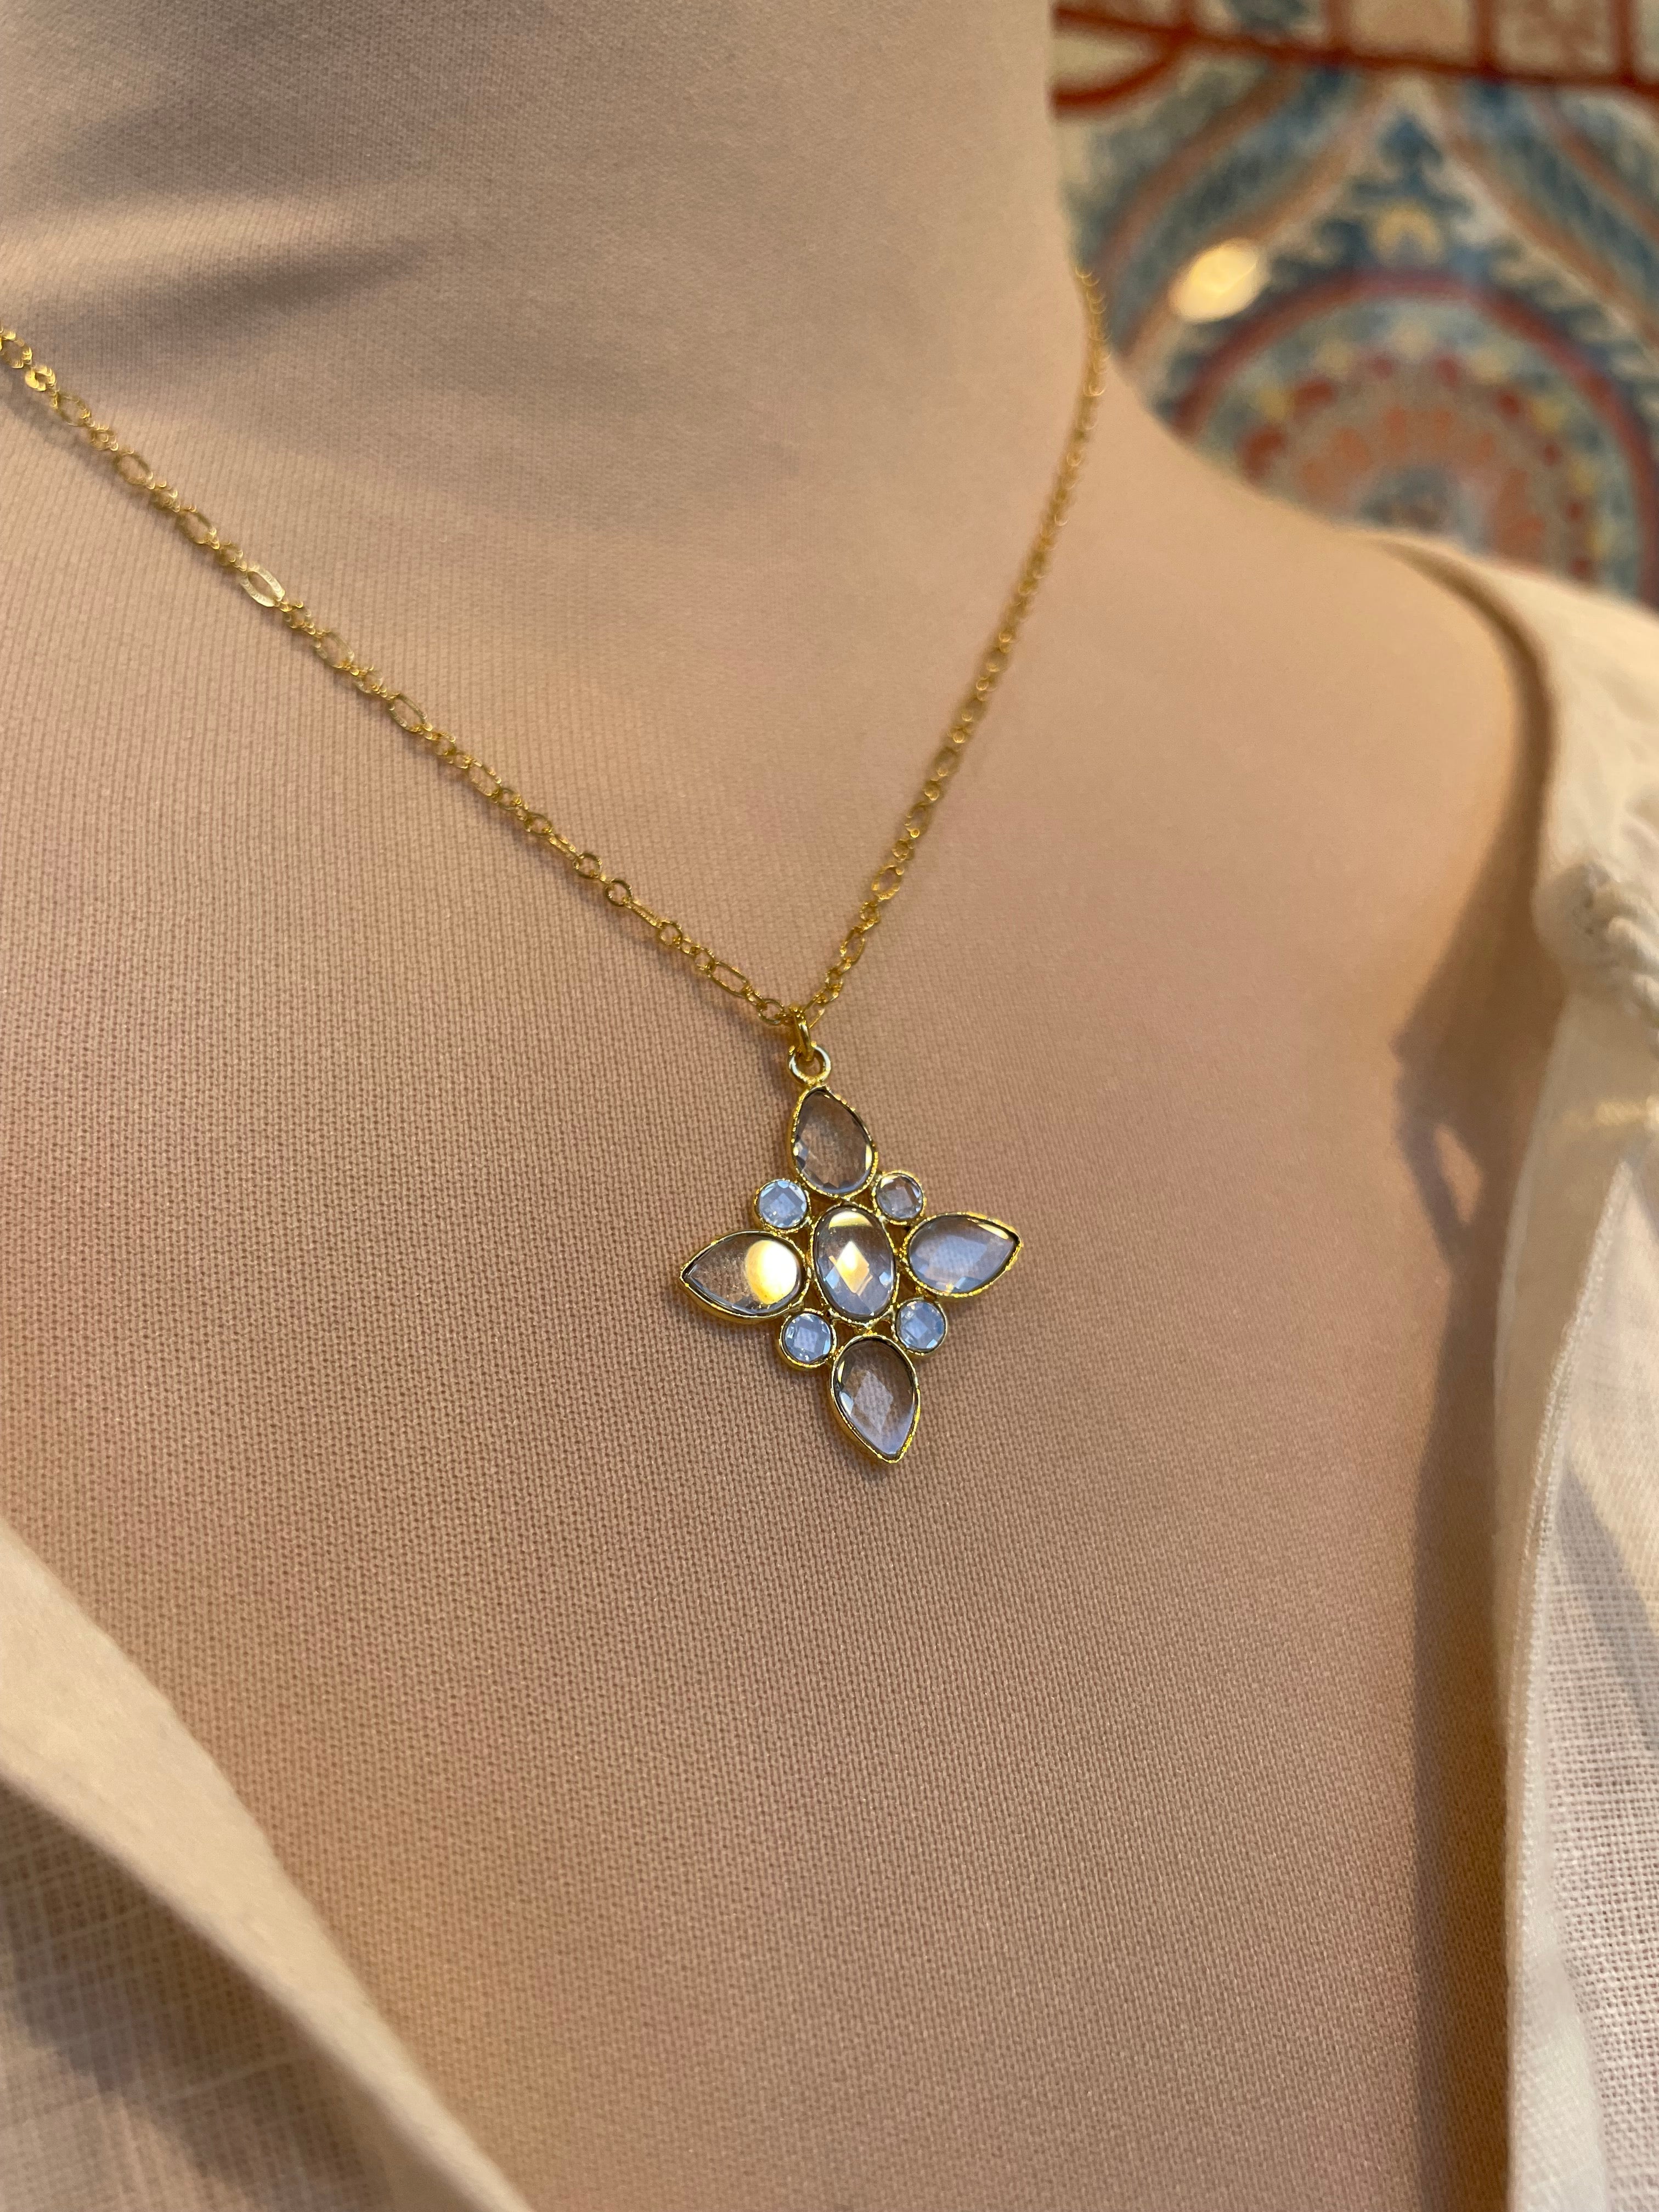 short necklace with crystal star pendant by virginie berman